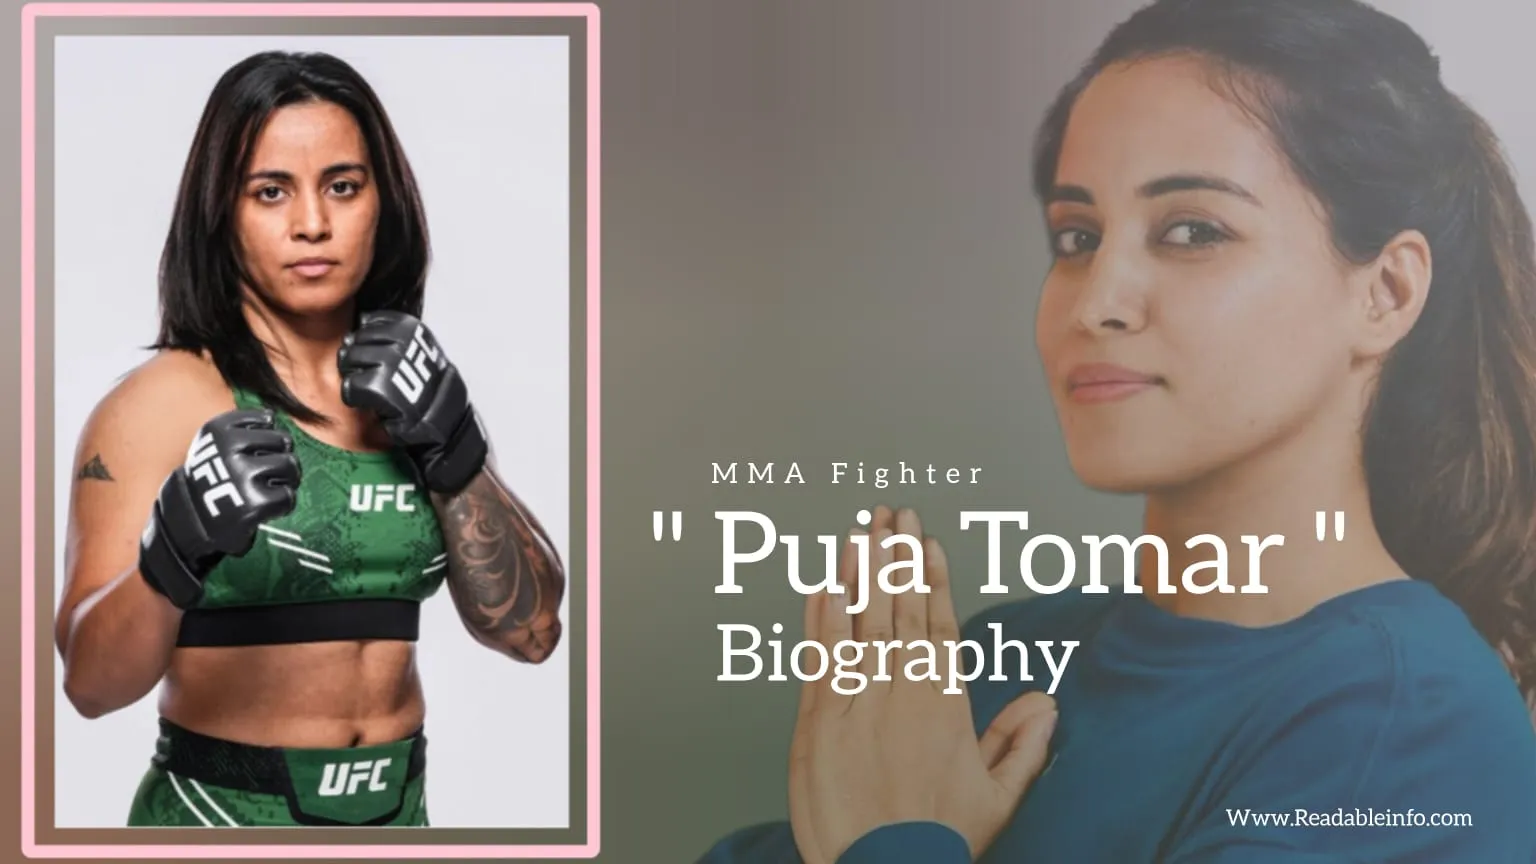 You are currently viewing Puja Tomar Biography (MMA Fighter)